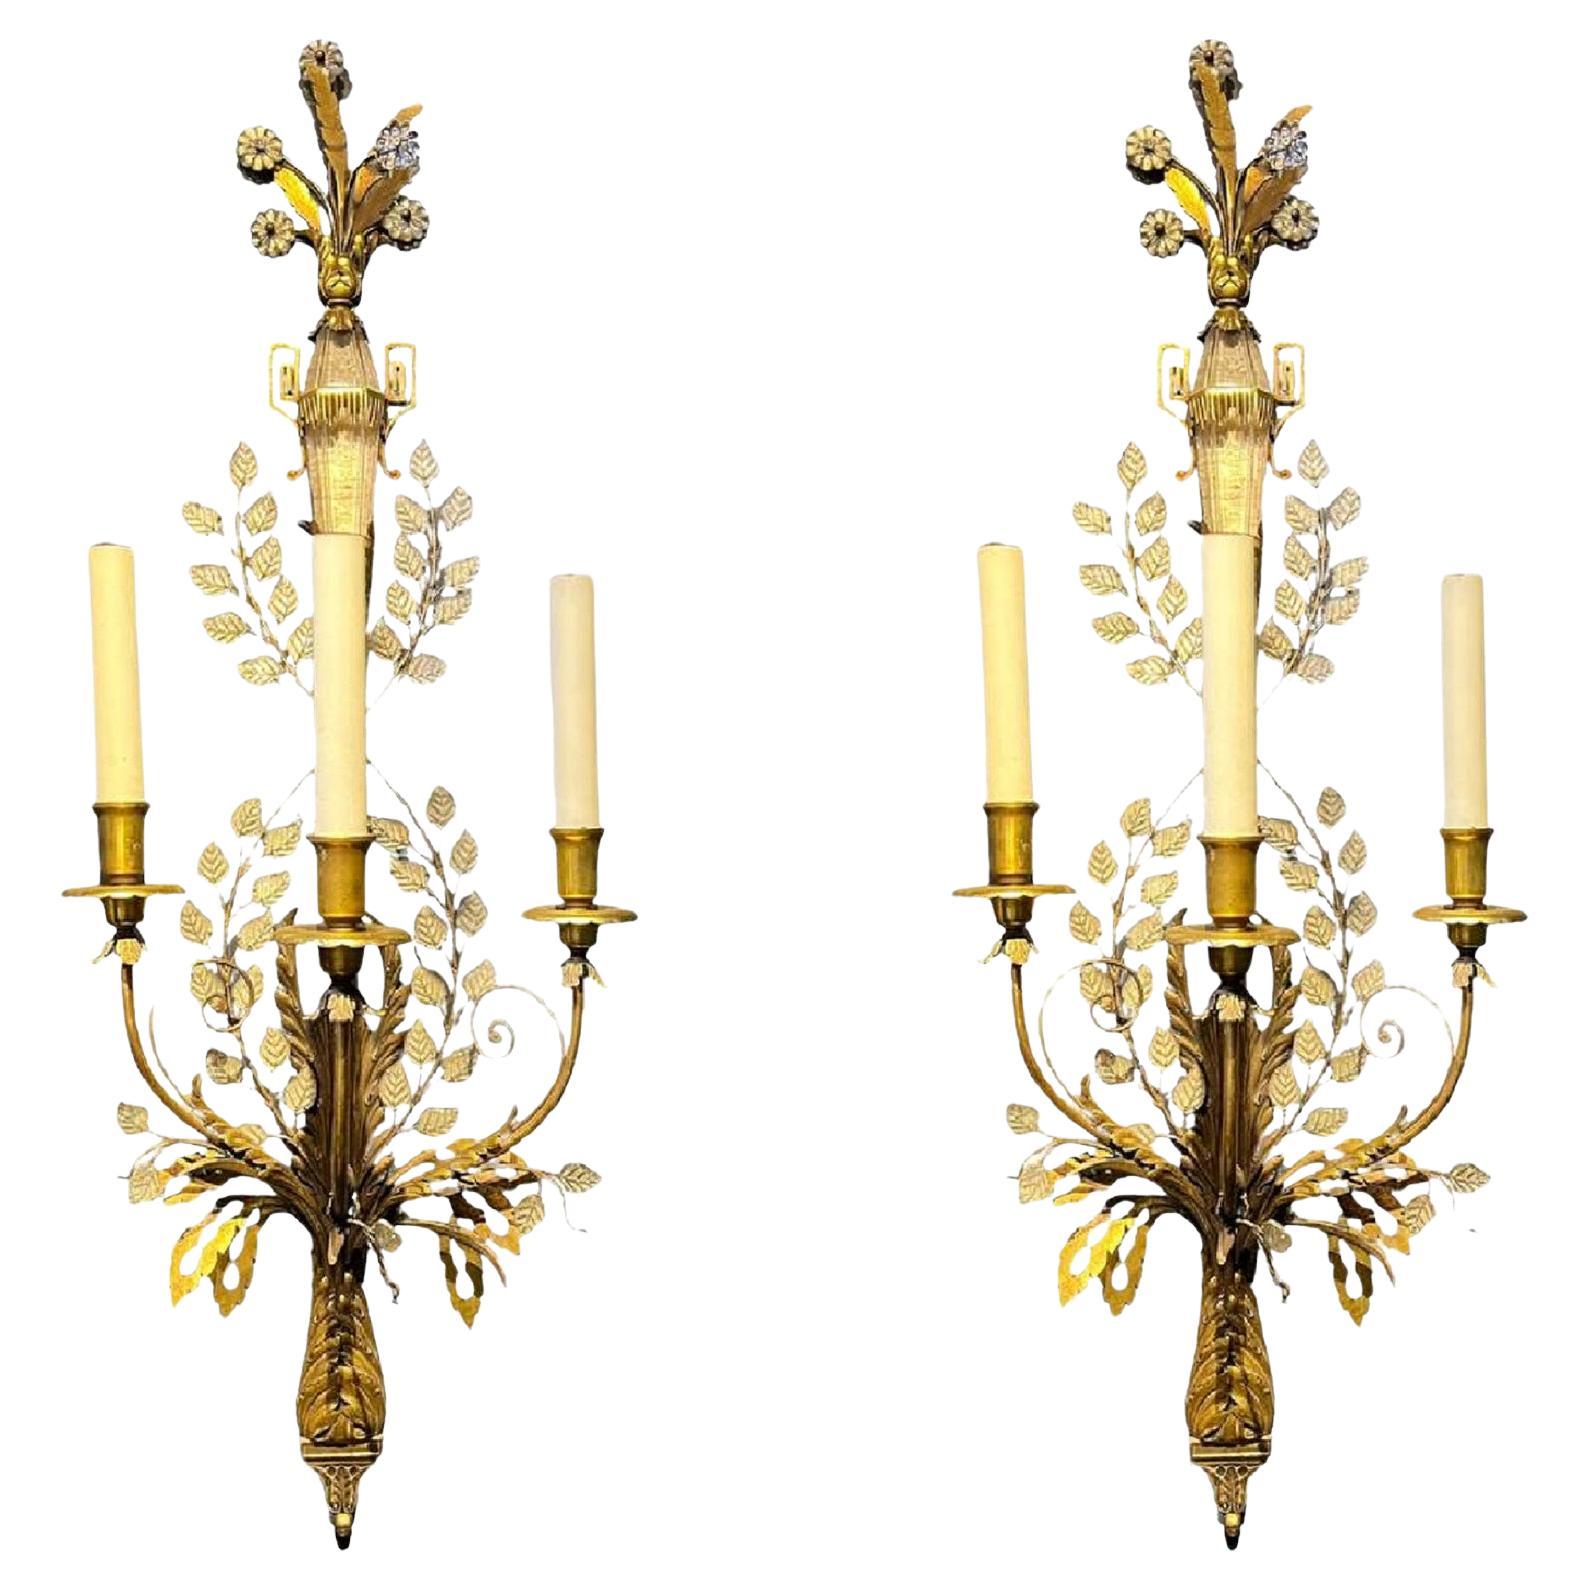 1900's Caldwell Large Bronze 3 Lights Sconces with Crystal Leaves and Urn For Sale